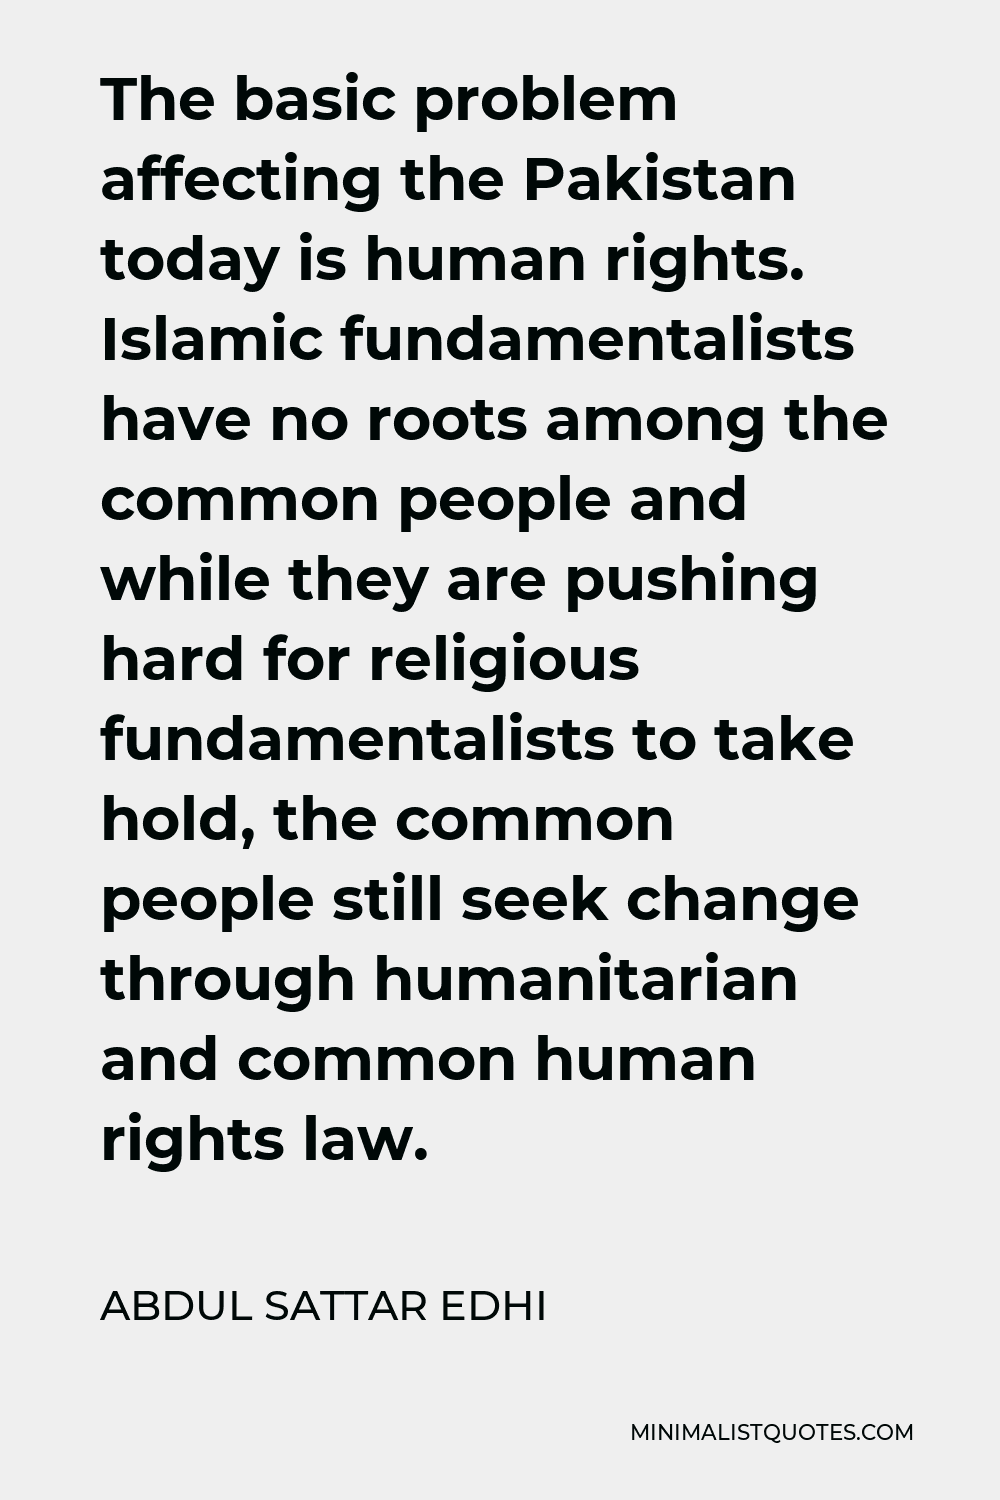 Abdul Sattar Edhi Quote - The basic problem affecting the Pakistan today is human rights. Islamic fundamentalists have no roots among the common people and while they are pushing hard for religious fundamentalists to take hold, the common people still seek change through humanitarian and common human rights law.